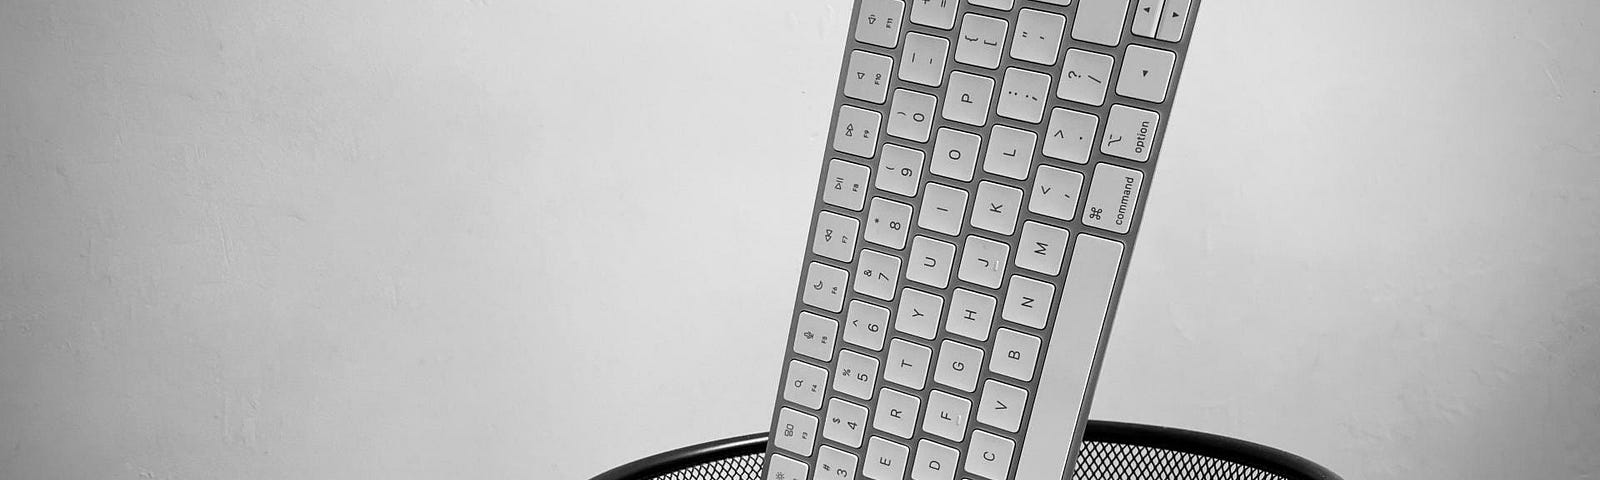 Black and white image of a hand holding an Apple Magic Keyboard with Touch ID over the trash can.